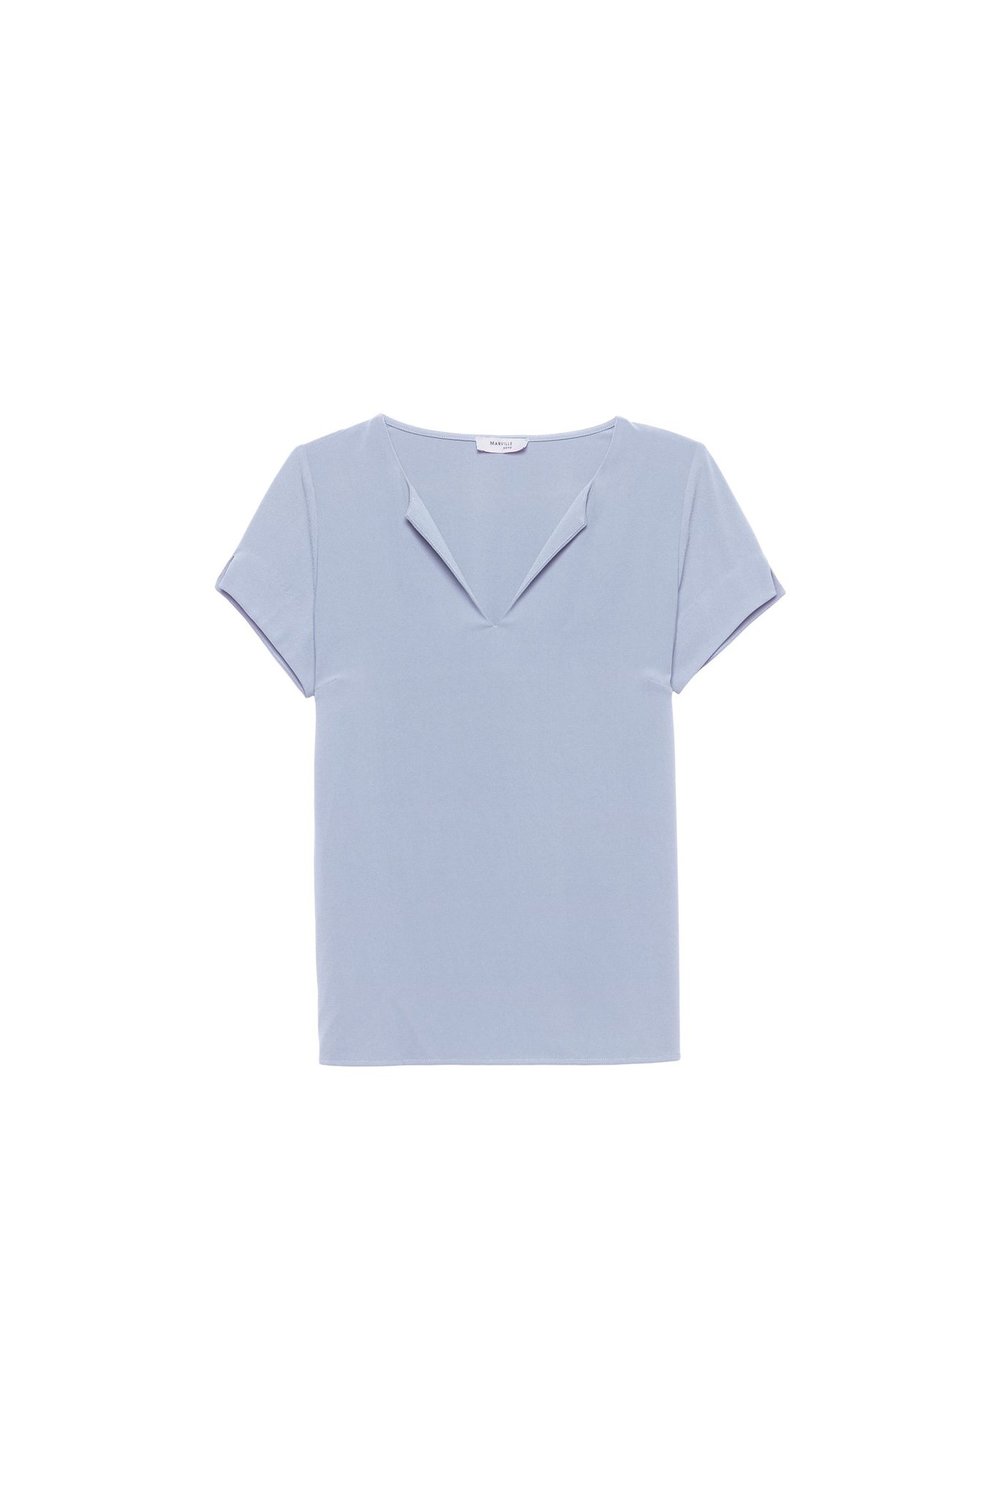 Marville Road Olivia Top in Light Blue Grey — UFO No More